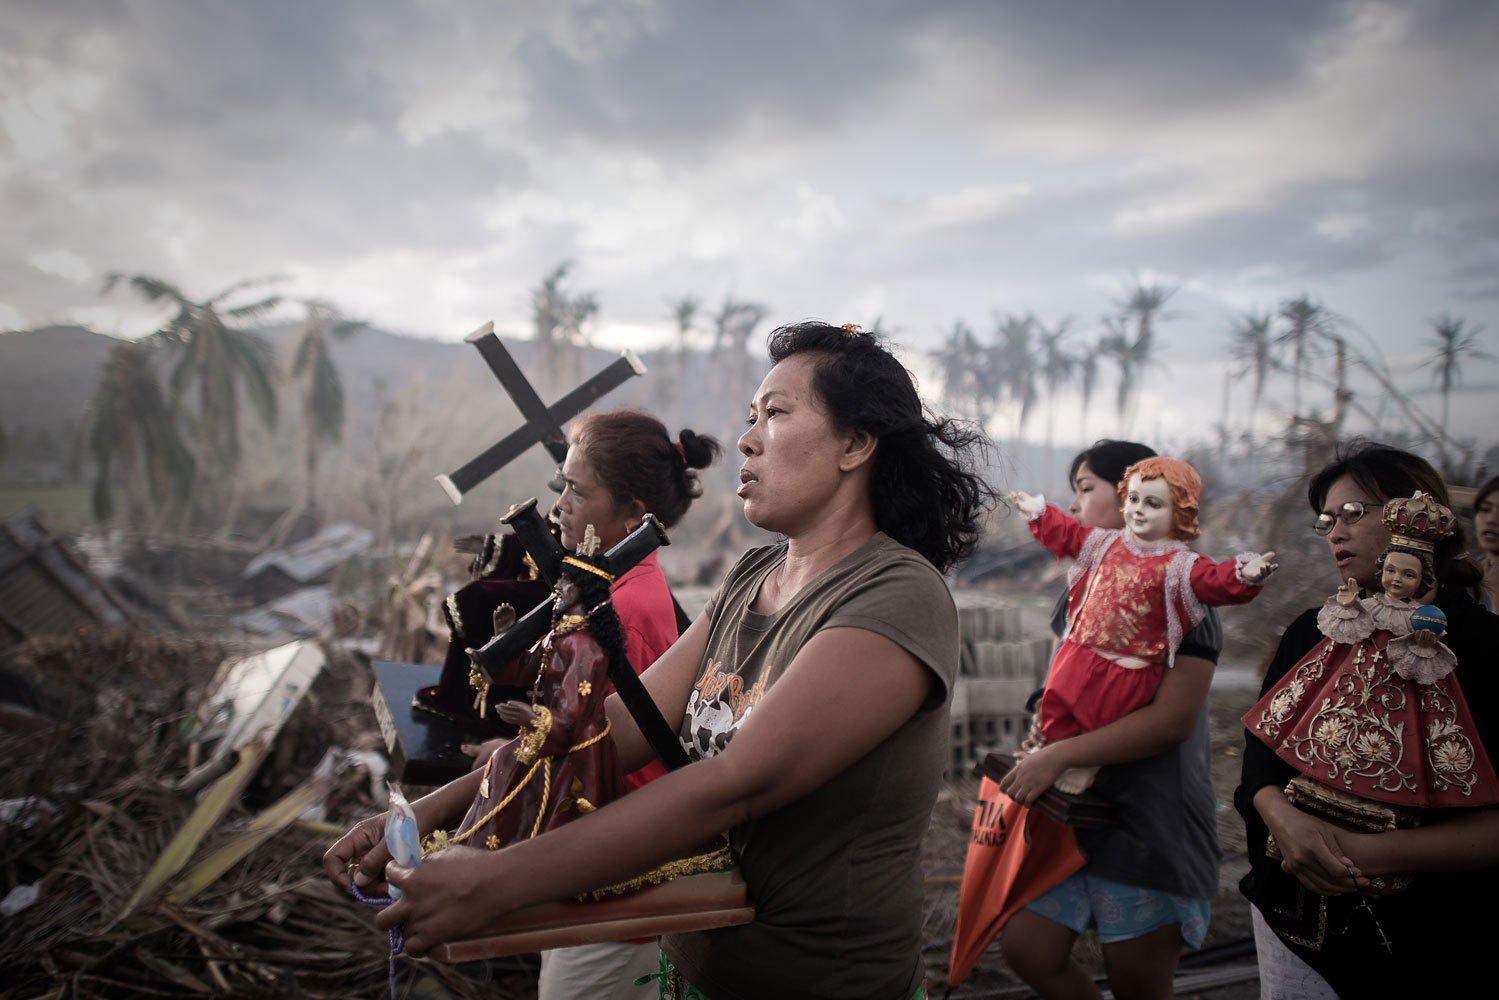 Survivors of Typhoon Haiyan march during a religious procession in Tolosa on the eastern Philippine island of Leyte on November 18, 2013.